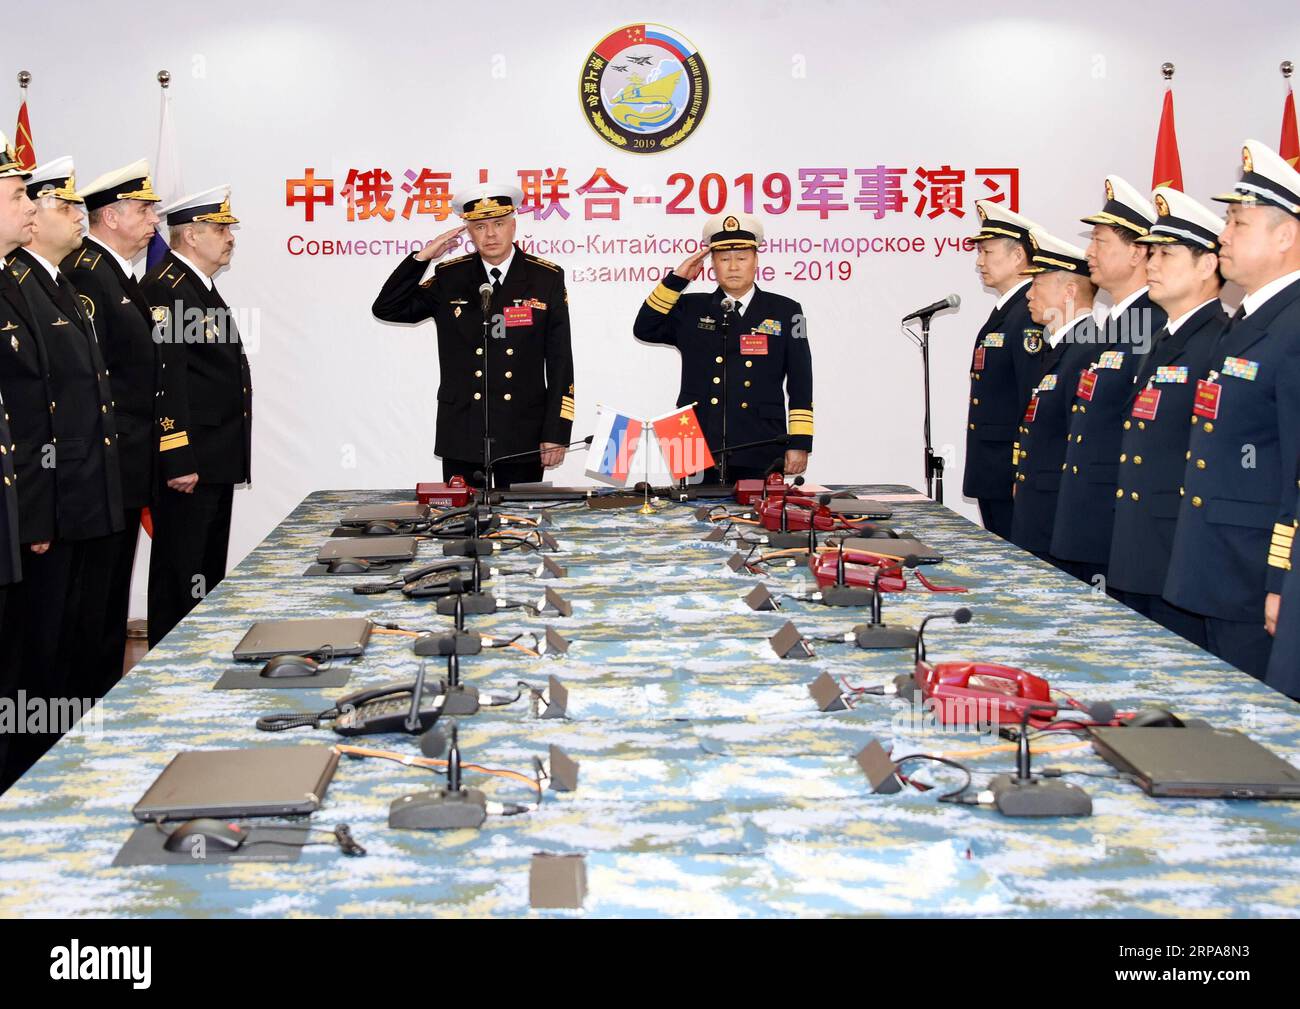 (190429) -- QINGDAO, April 29, 2019 (Xinhua) -- Qiu Yanpeng (C, R), chief director of Joint Sea-2019 exercise from the Chinese side and deputy commander of the Chinese People s Liberation Army (PLA) Navy, and Alexander Vitko (C, L), chief director of the exercise from the Russian side and deputy commander-in-chief of the Russian Navy, attend the opening ceremony of the Sino-Russian Joint Sea-2019 exercise in Qingdao, east China s Shandong Province, April 29, 2019. Russian naval vessels arrived in Qingdao on Monday to participate in the Sino-Russian Joint Sea-2019 exercise. The exercise will fo Stock Photo